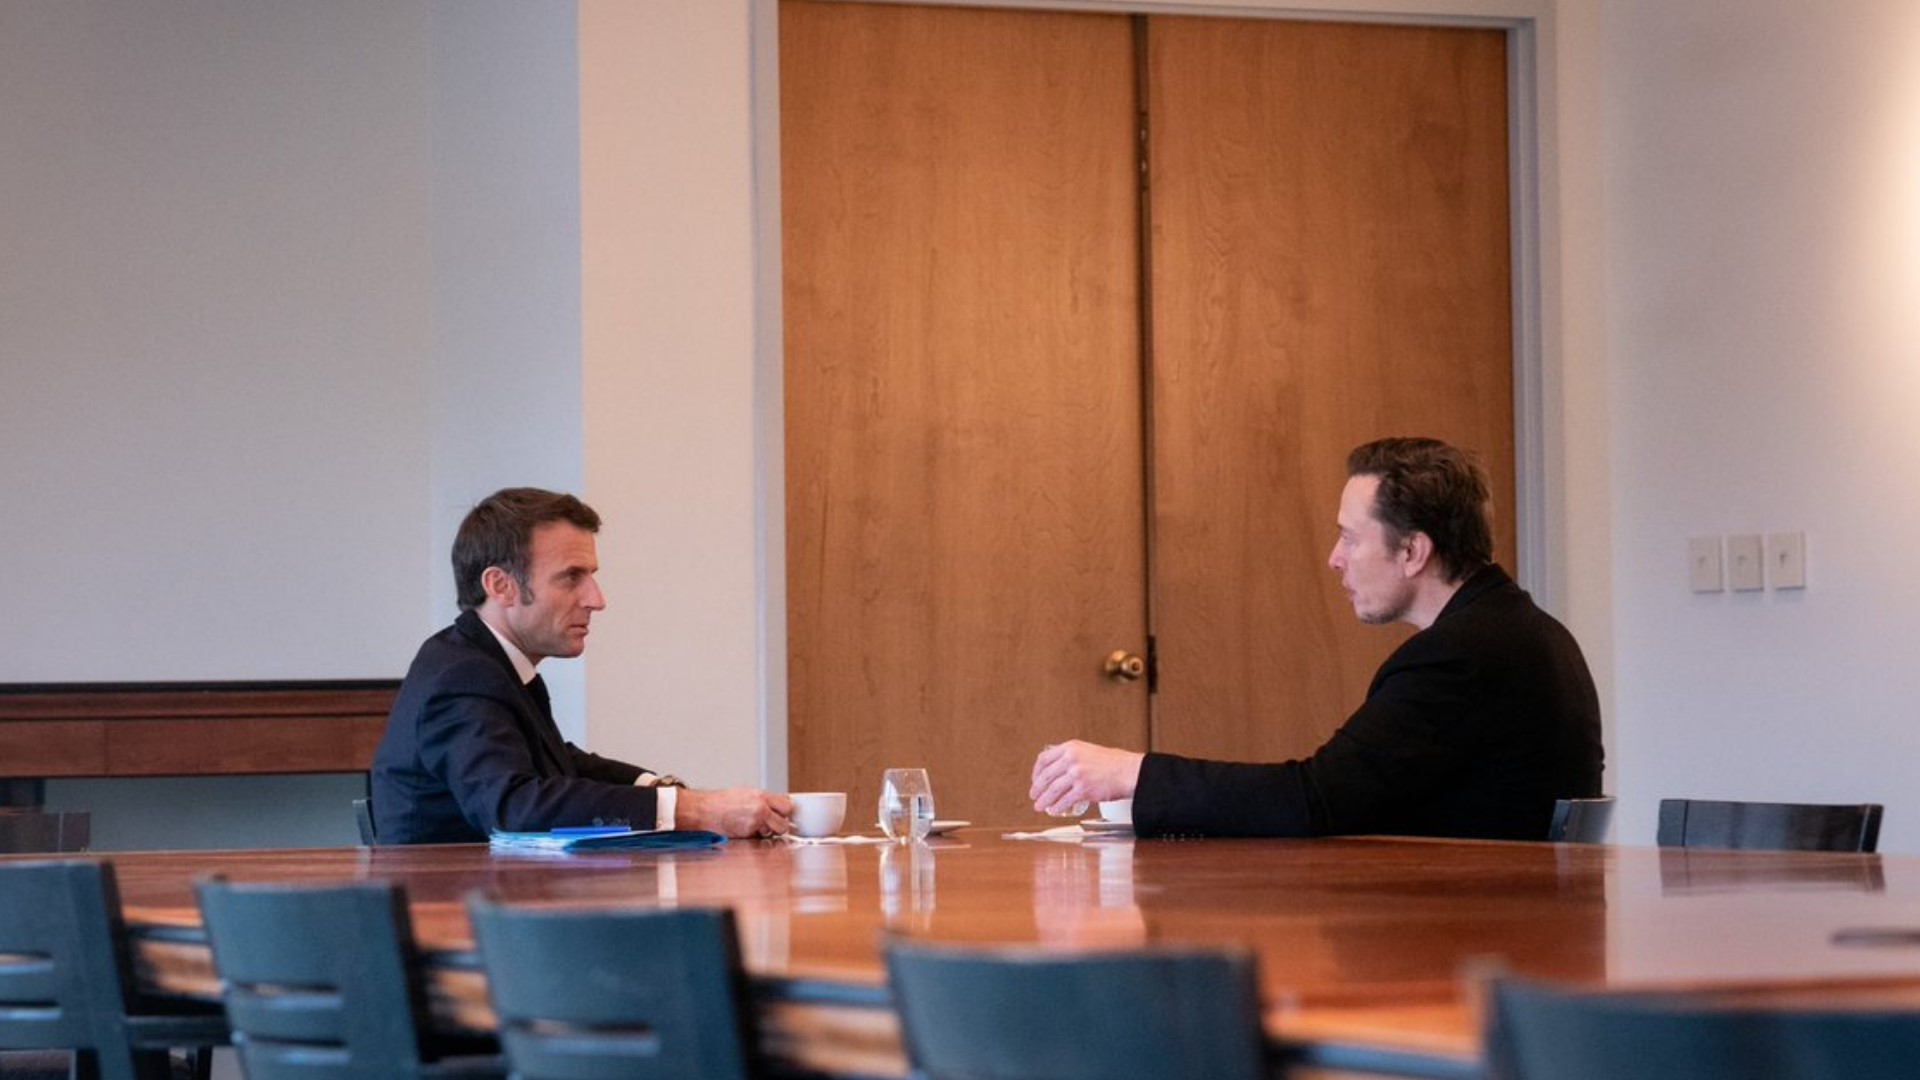 Macron said I met with Elon Musk this afternoon, and we had a clear and honest discussion."